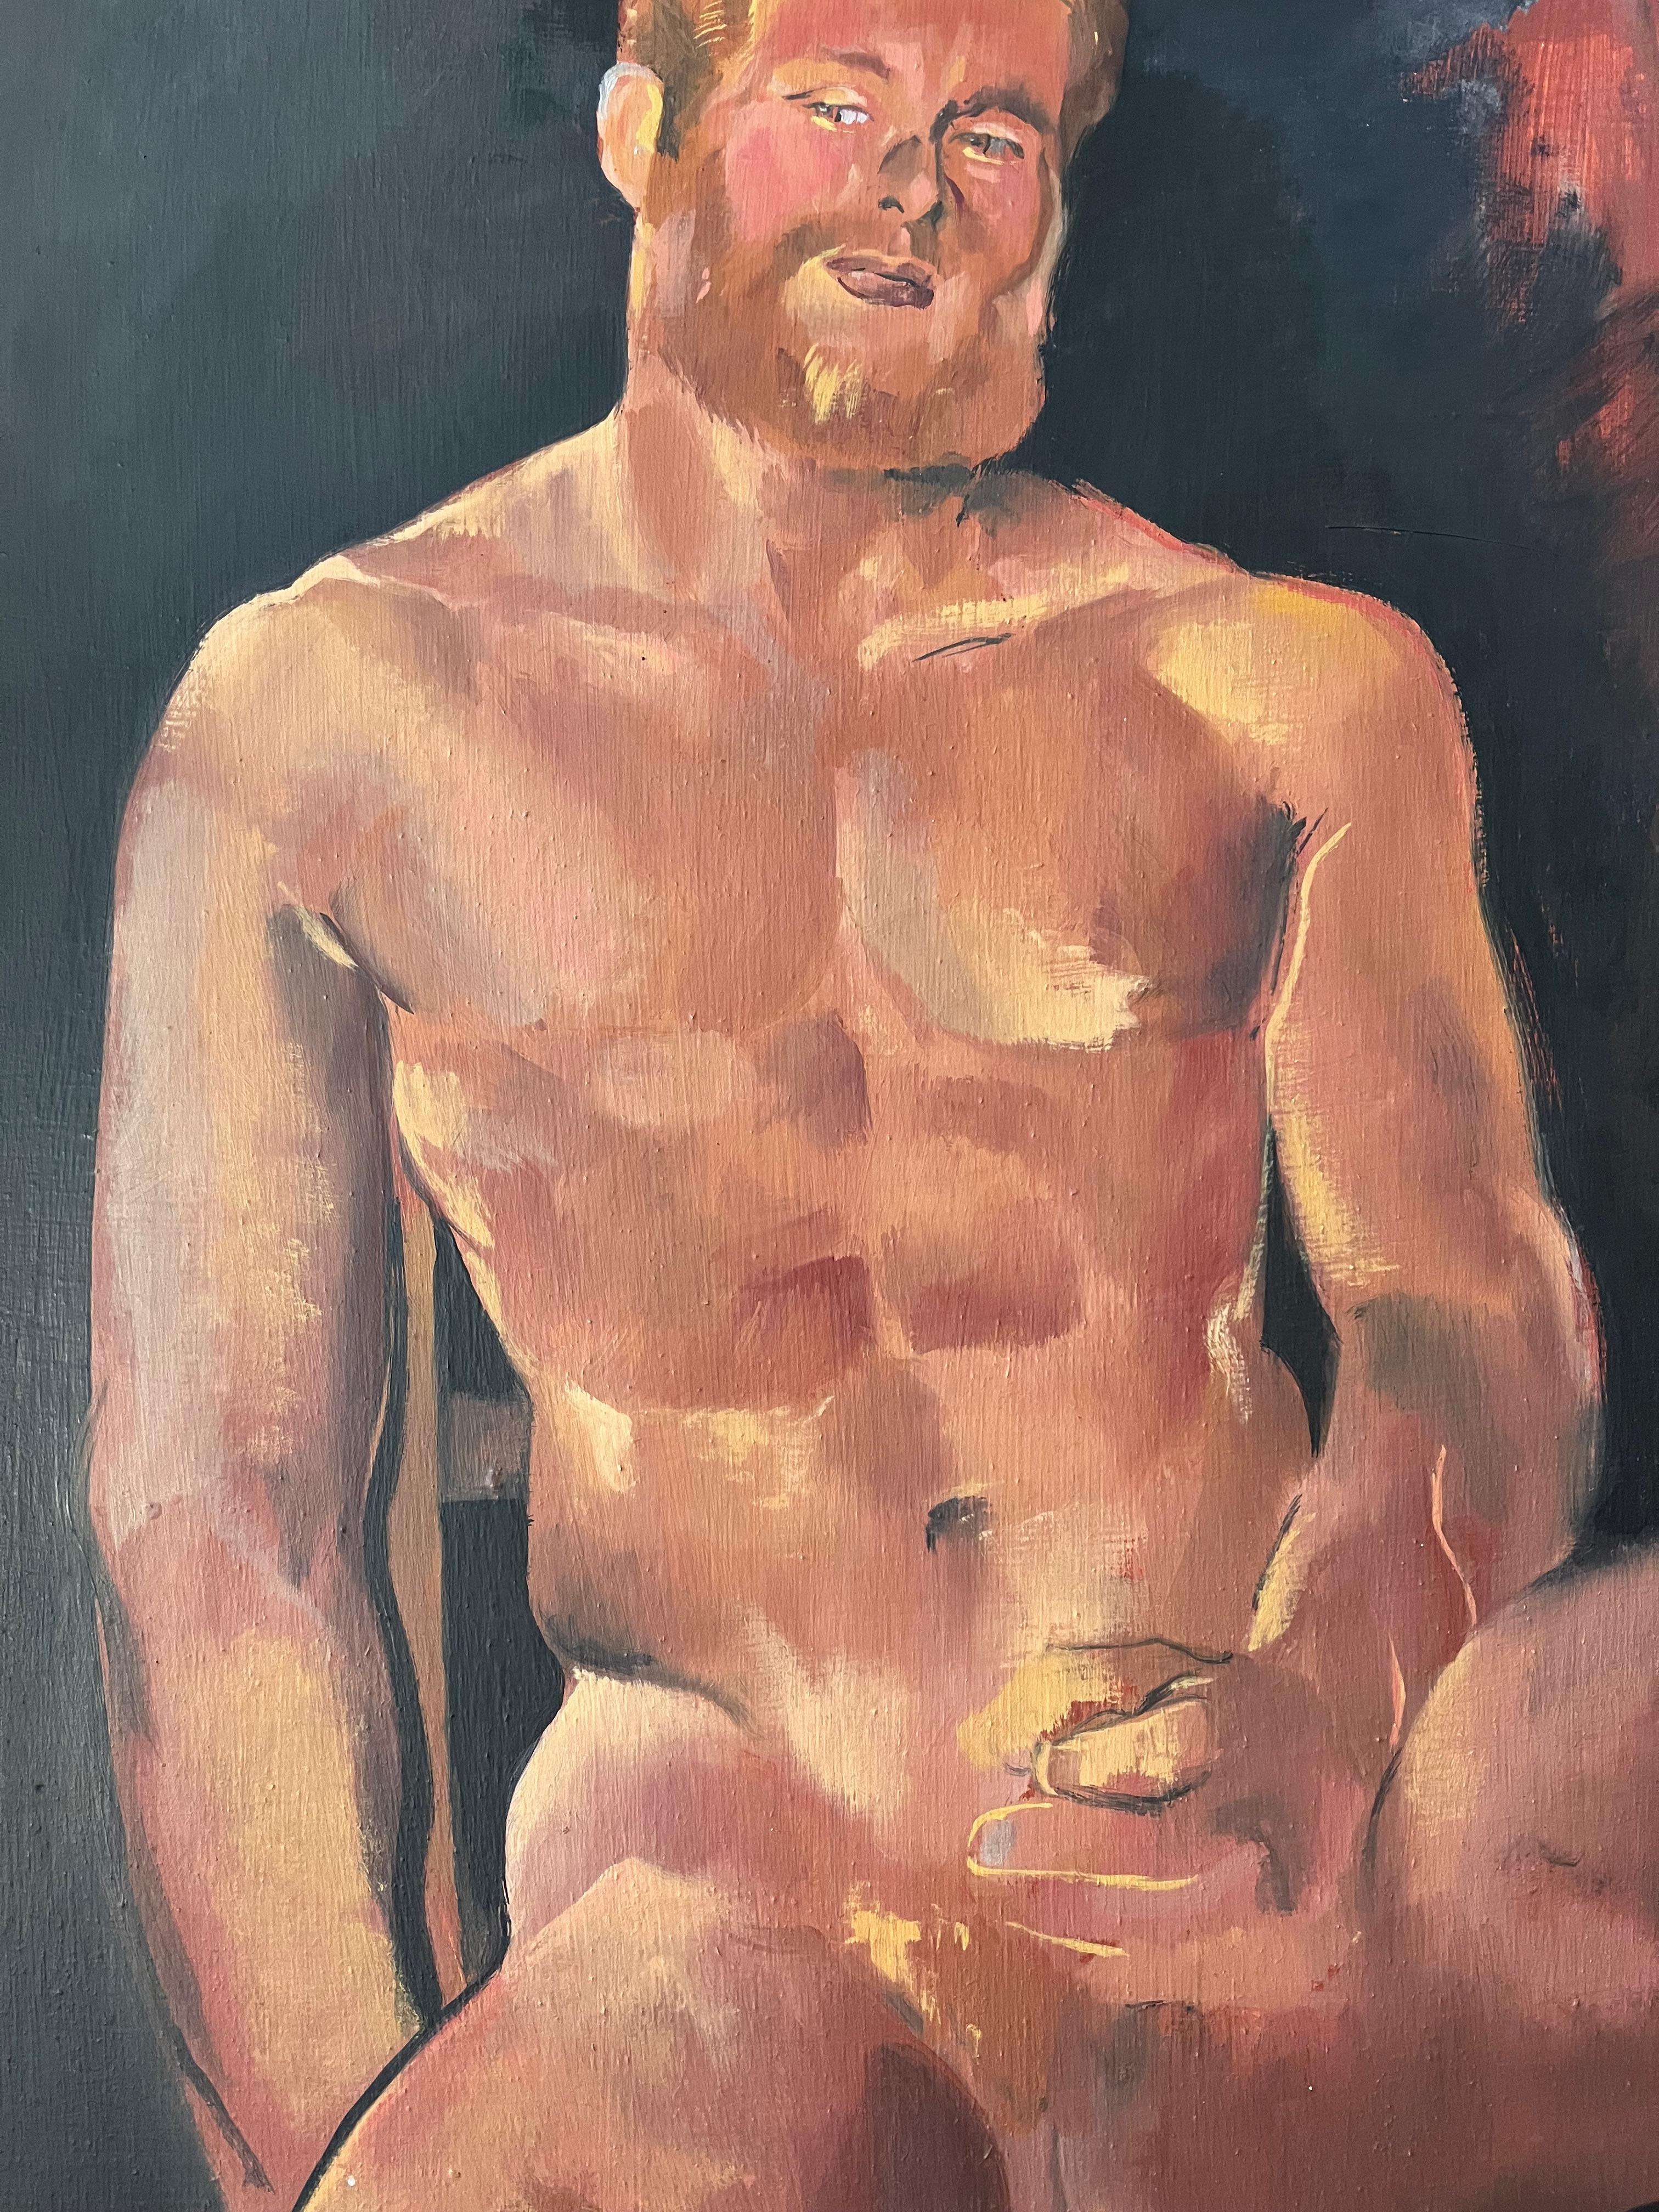 1980s Erotic nude male portrait of artist's lover, Iconic piece from gay history For Sale 1